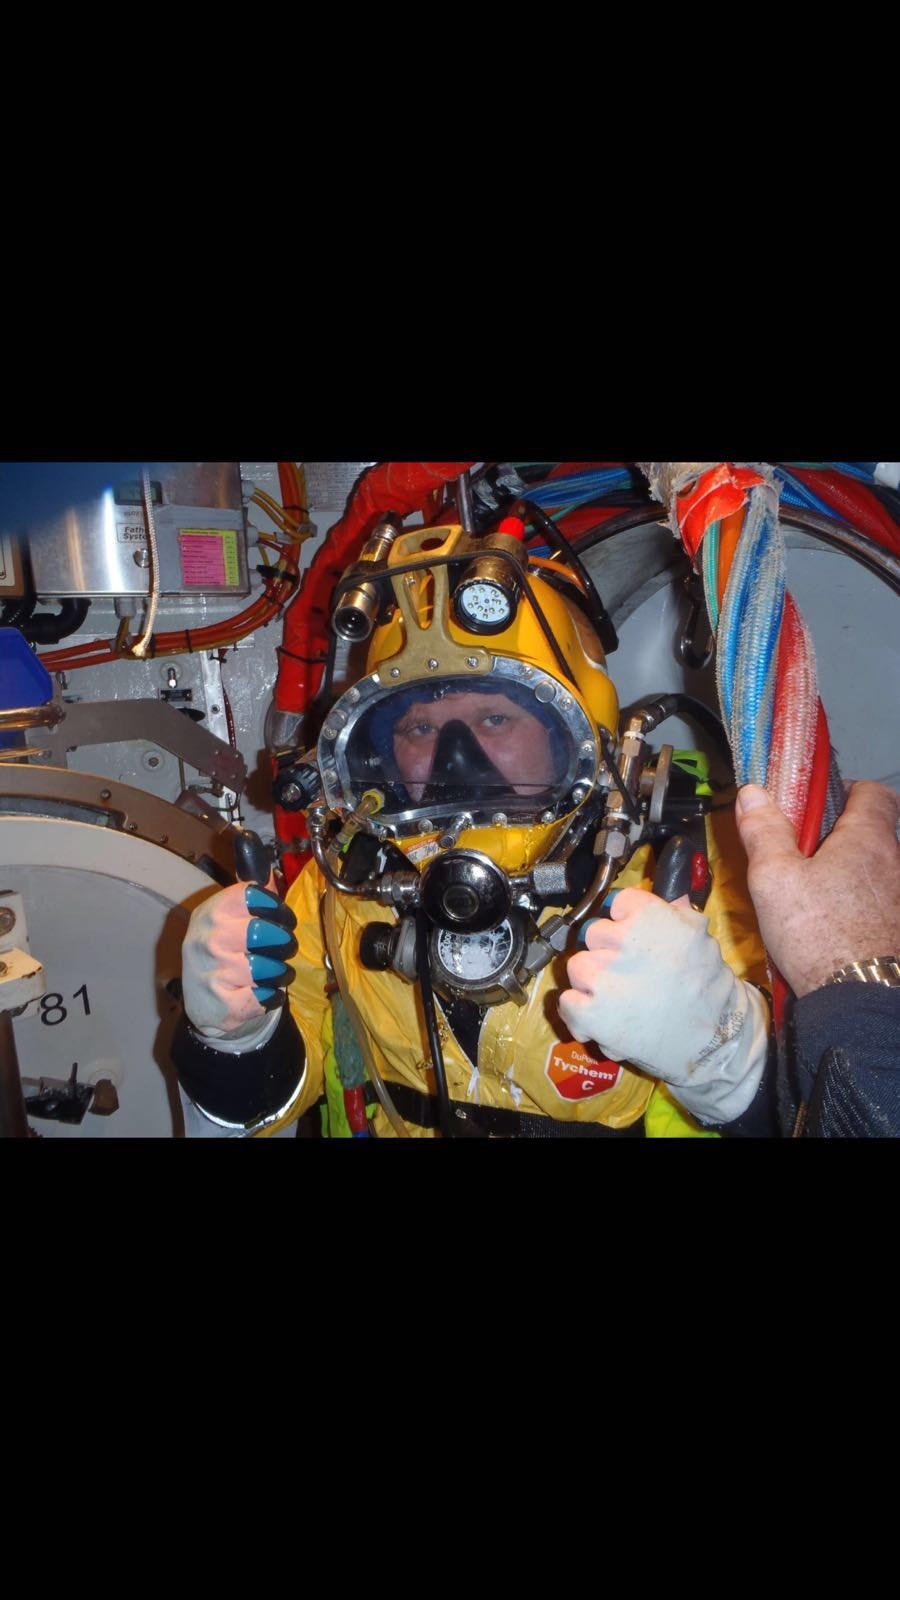 A day in the repetitive life of a commercial sat diver